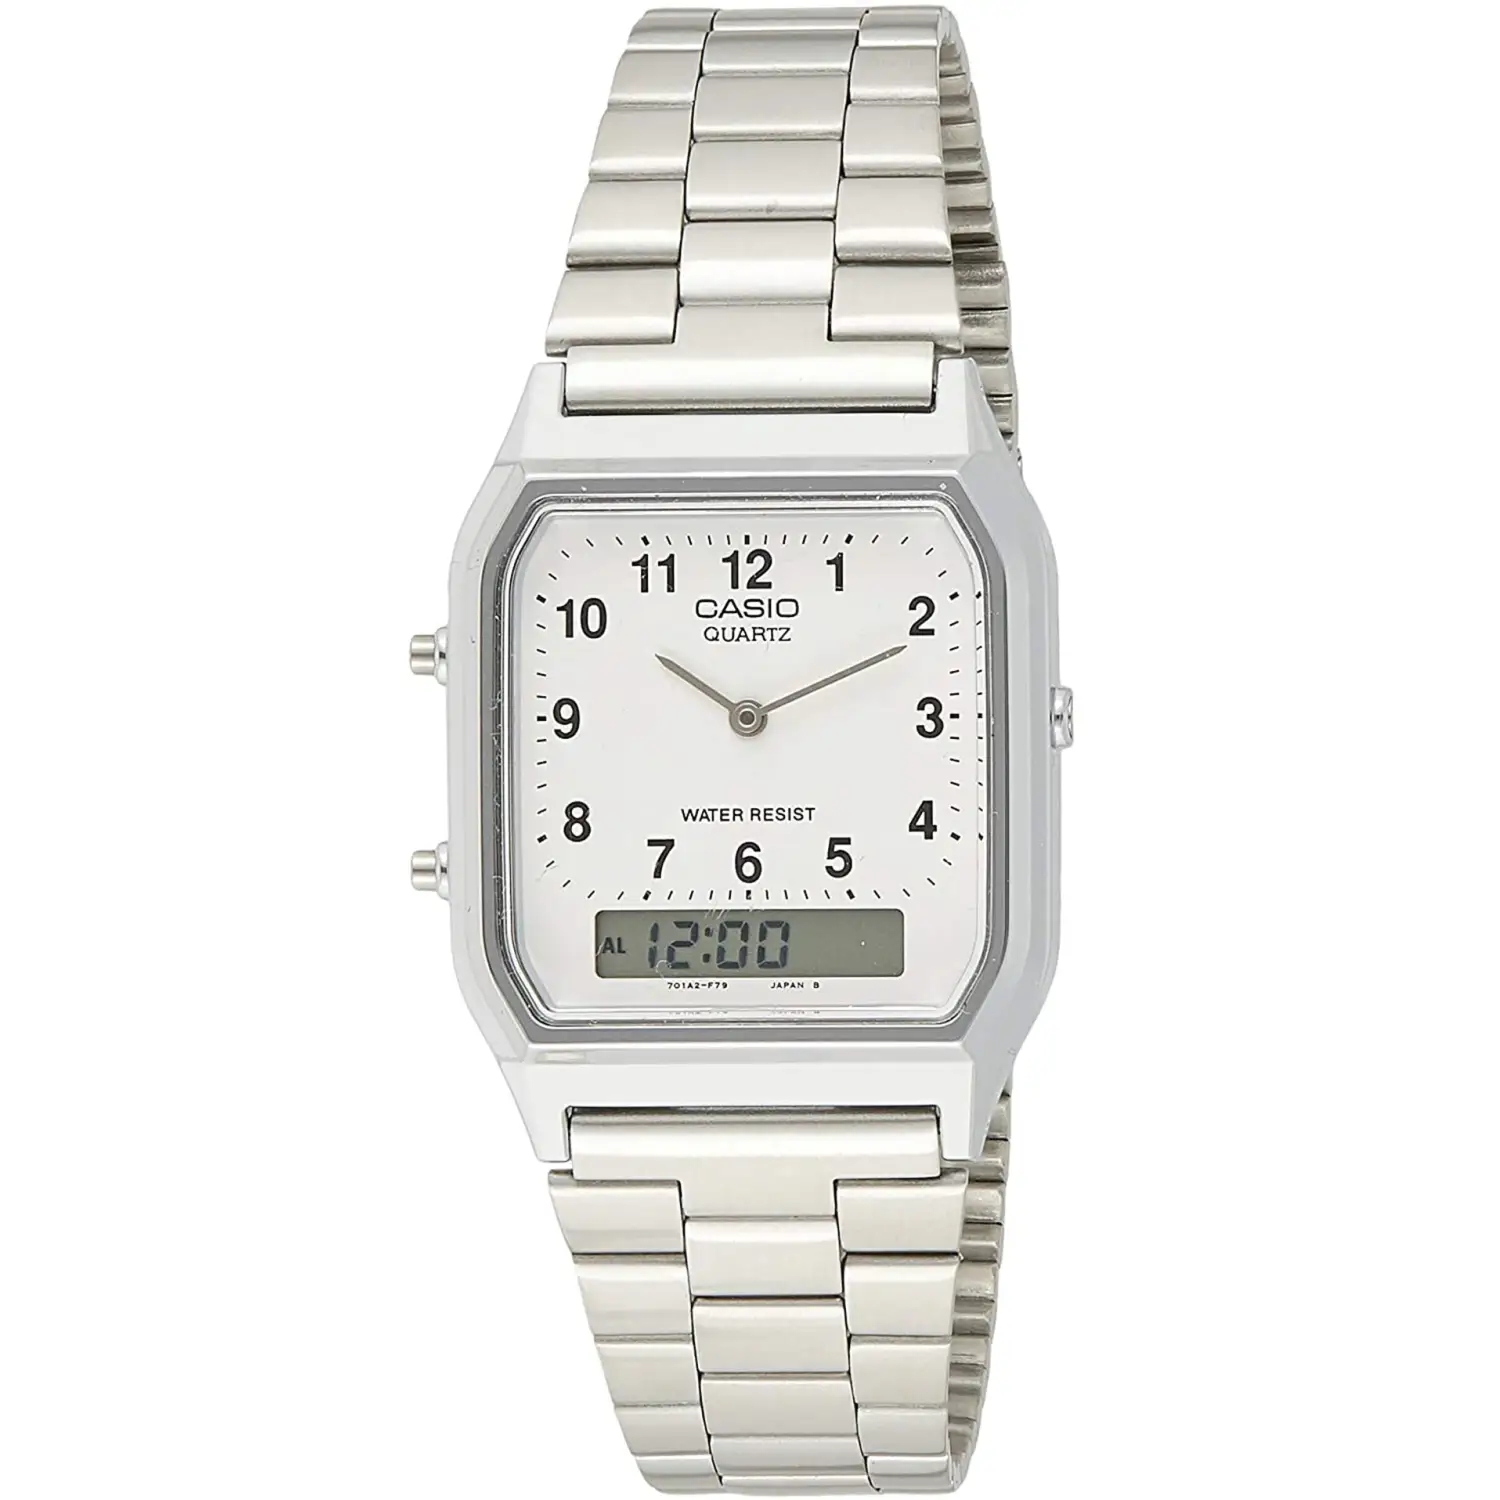 Casio Men's Classic Stainless Steel Watch AQ230A-7B –